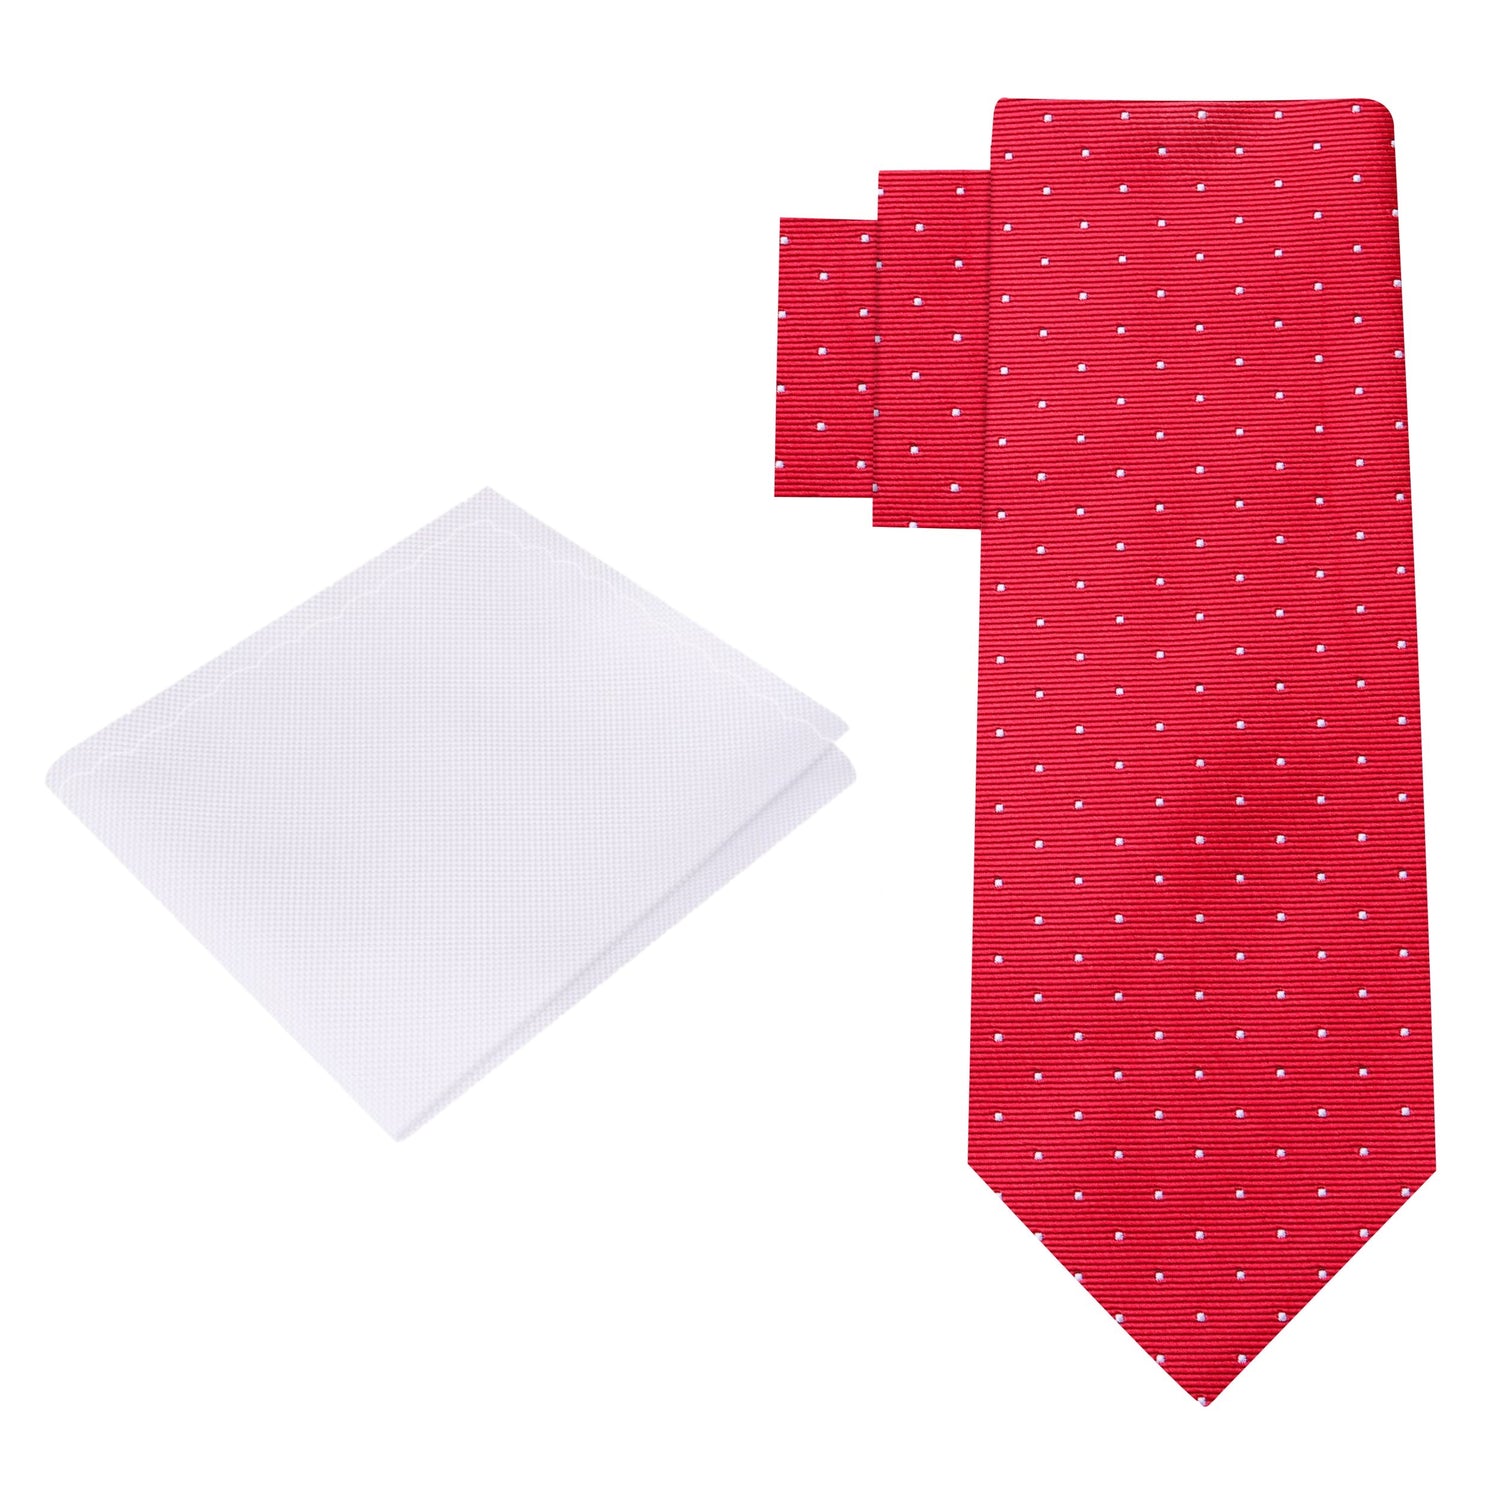 View 2: Red, White Polka Necktie and White Square